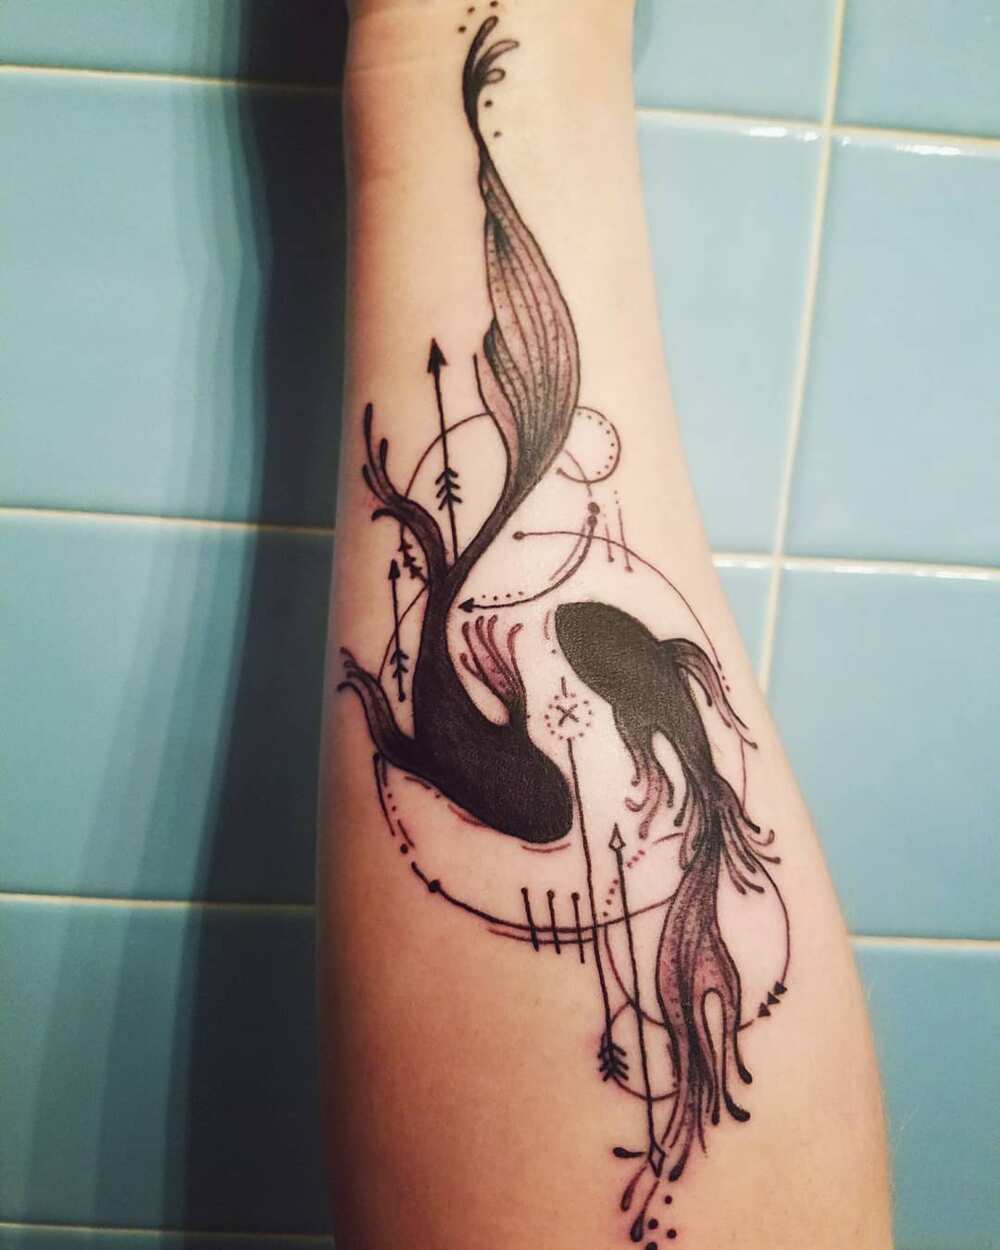 Pisces signs tattoo